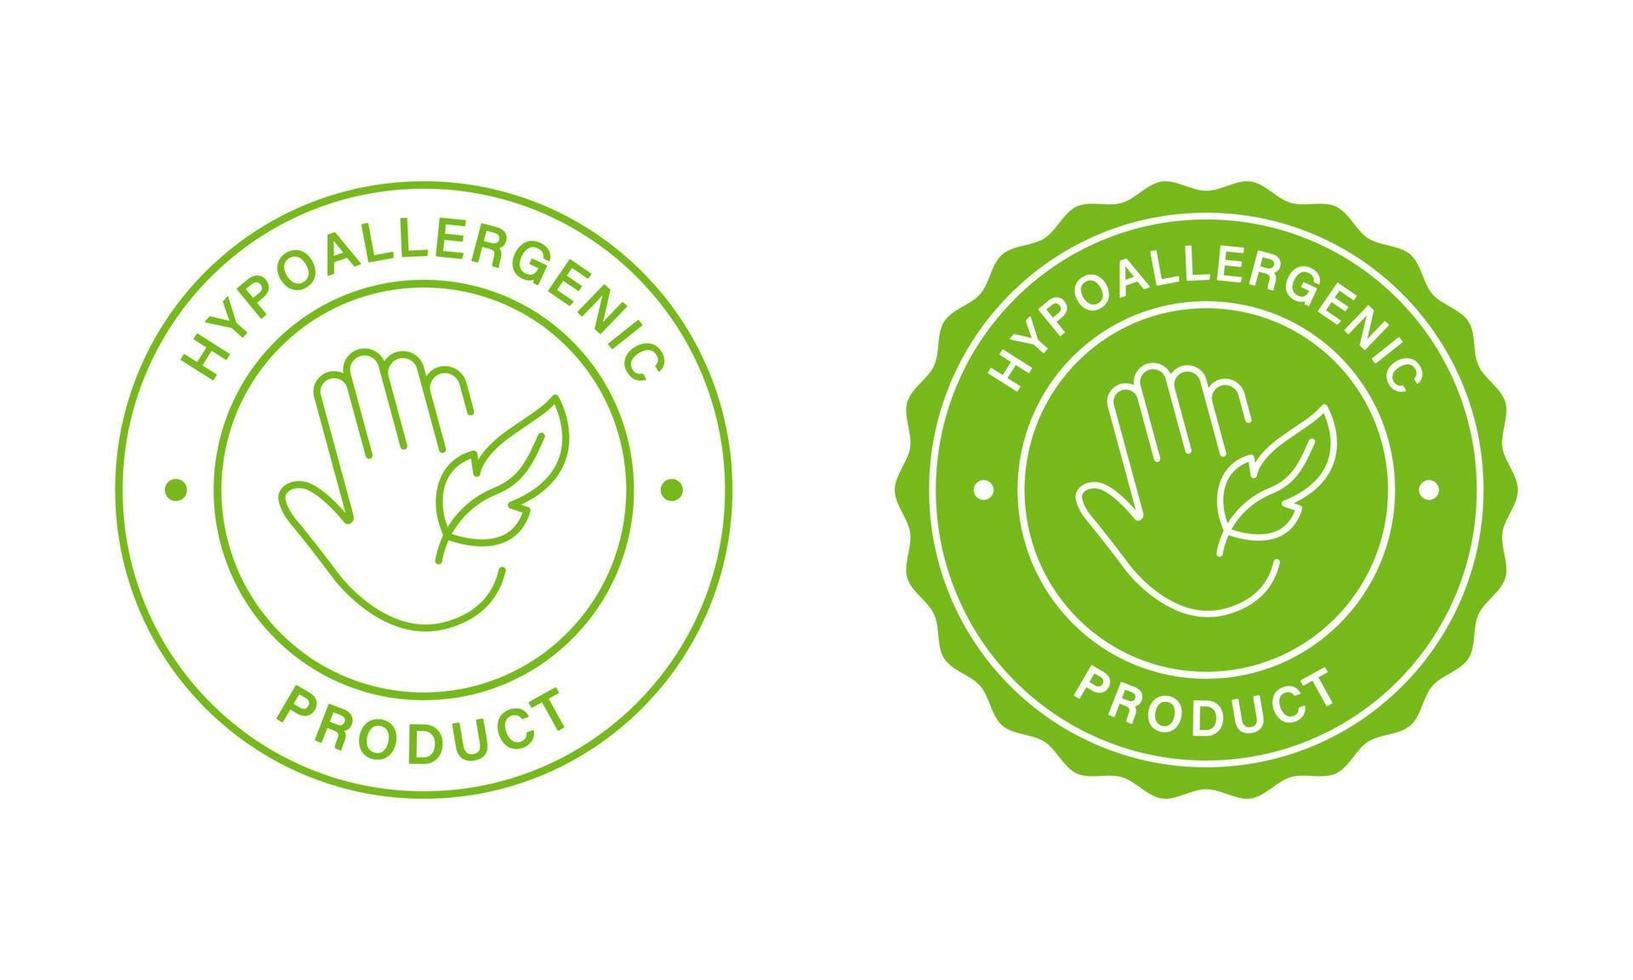 Safe Hypoallergenic Product Stamps Set. Green Label For Hypoallergenic Safe Cosmetics. Allergen Free Stickers. Hand And Feather Icon. Approved Hypoallergenic Material. Isolated Vector Illustration.